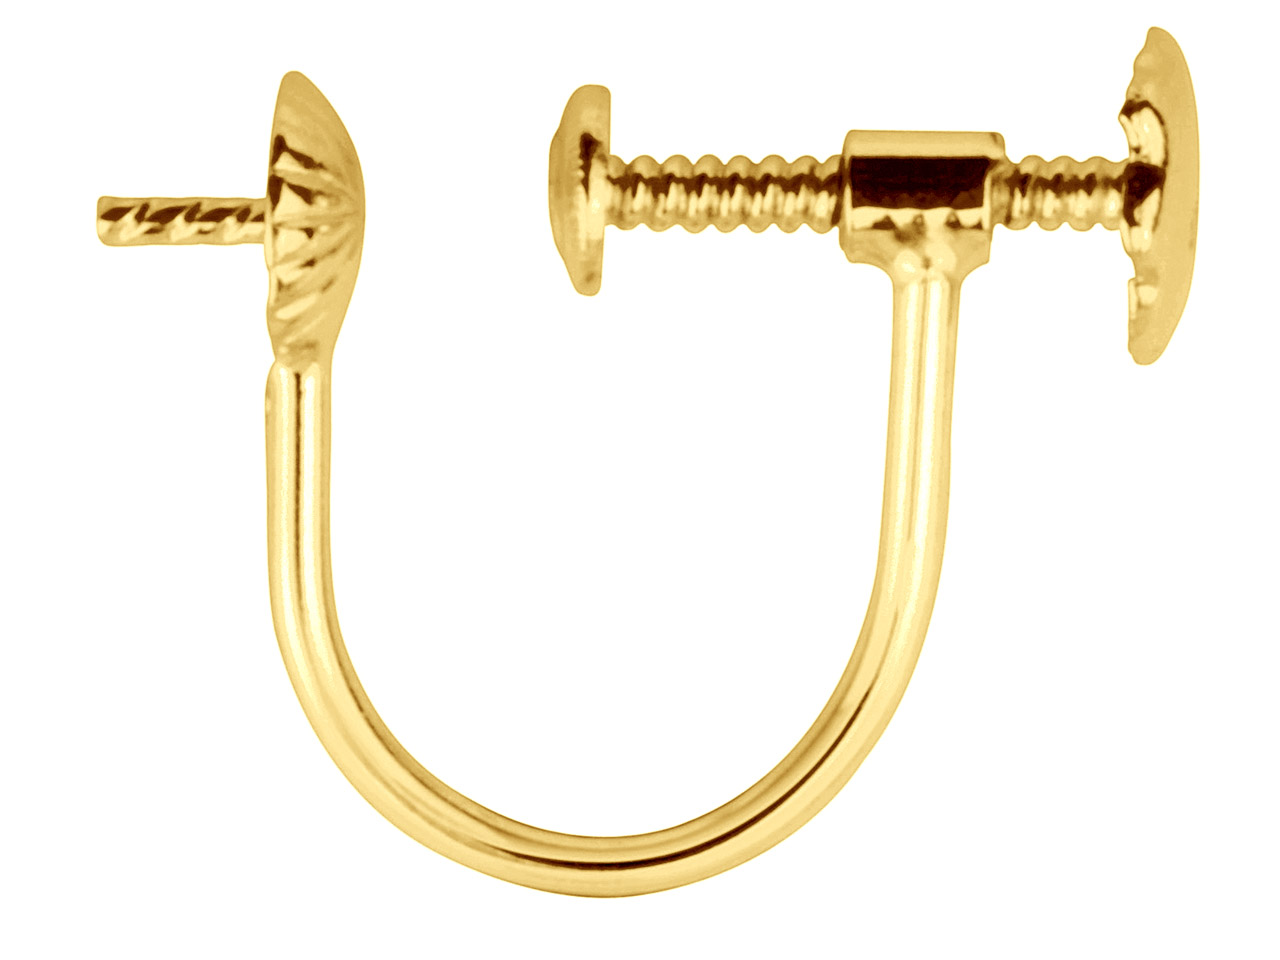 18ct Yellow Gold Ear Screw Cup And Peg 4mm Round Wire Unplannished Shank Questions & Answers